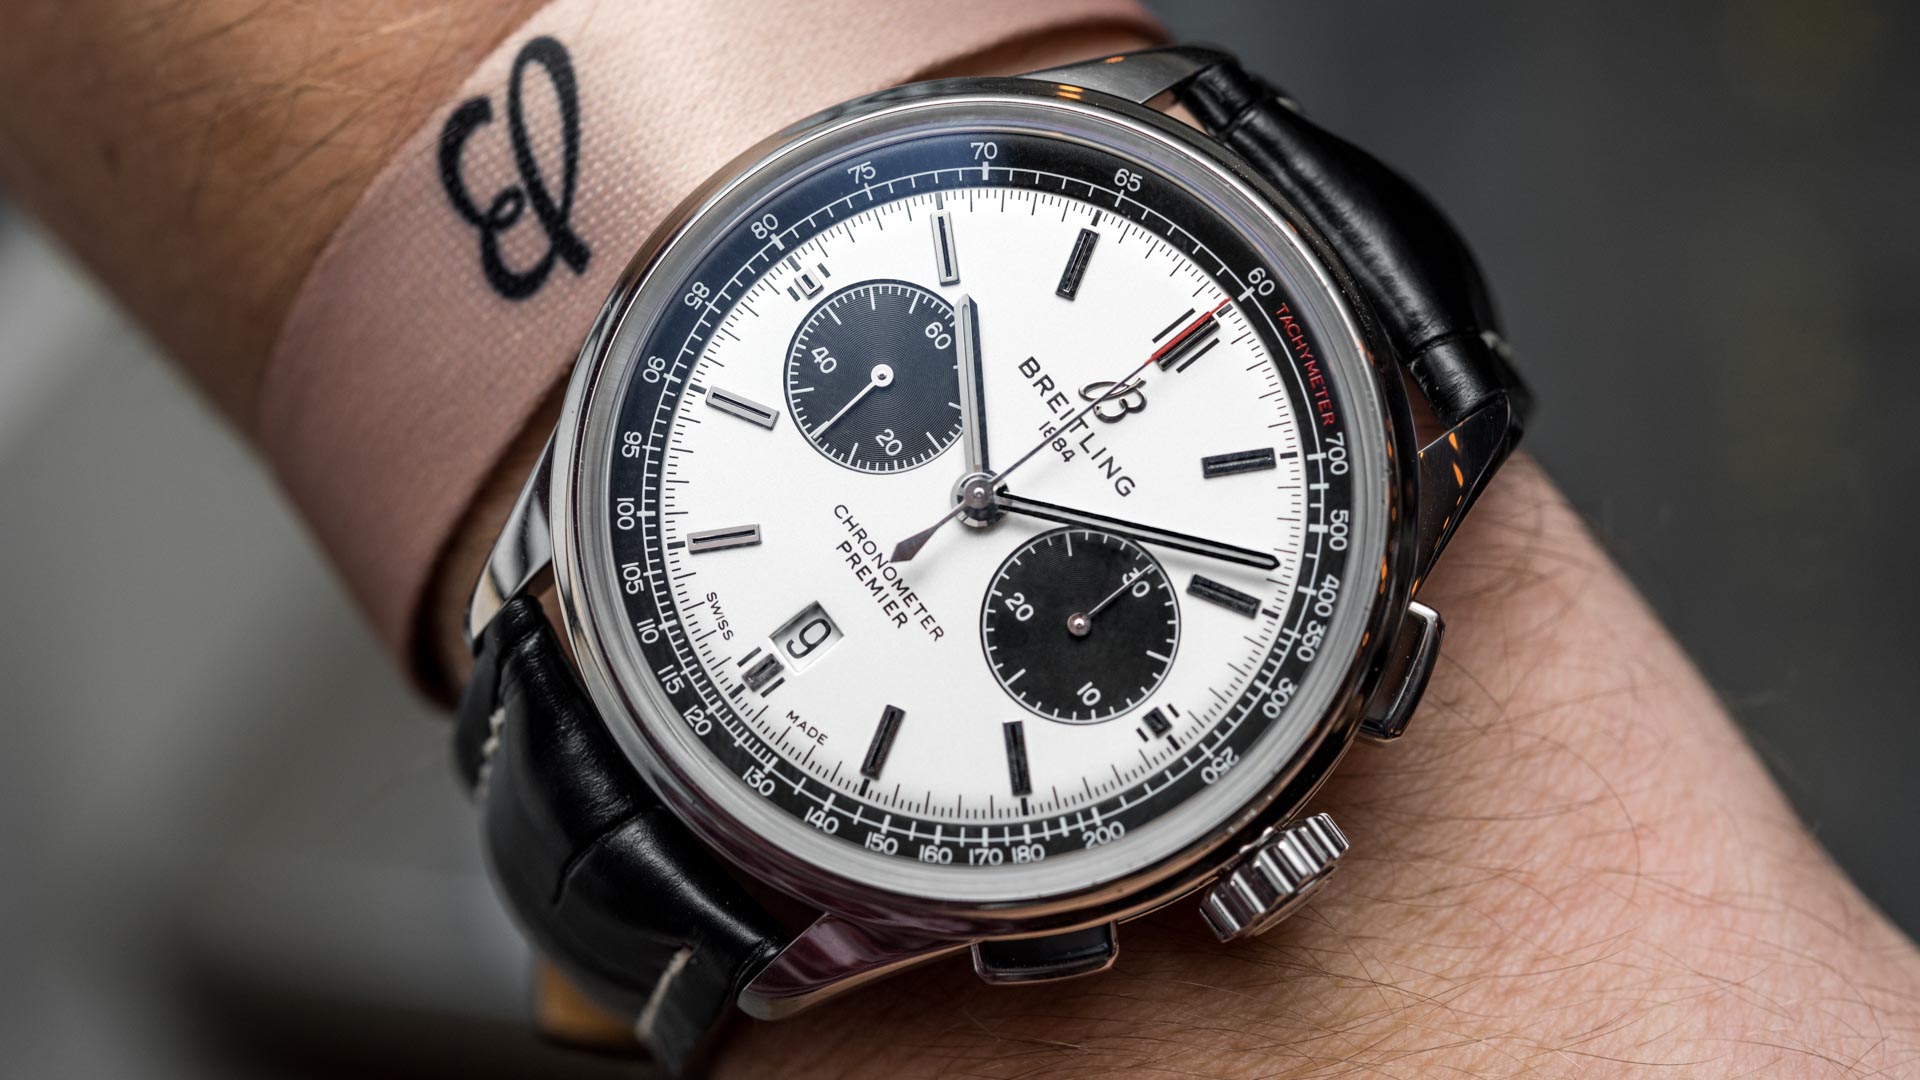 Breitling Premier B01 Chronograph 42 Watch Hands-On